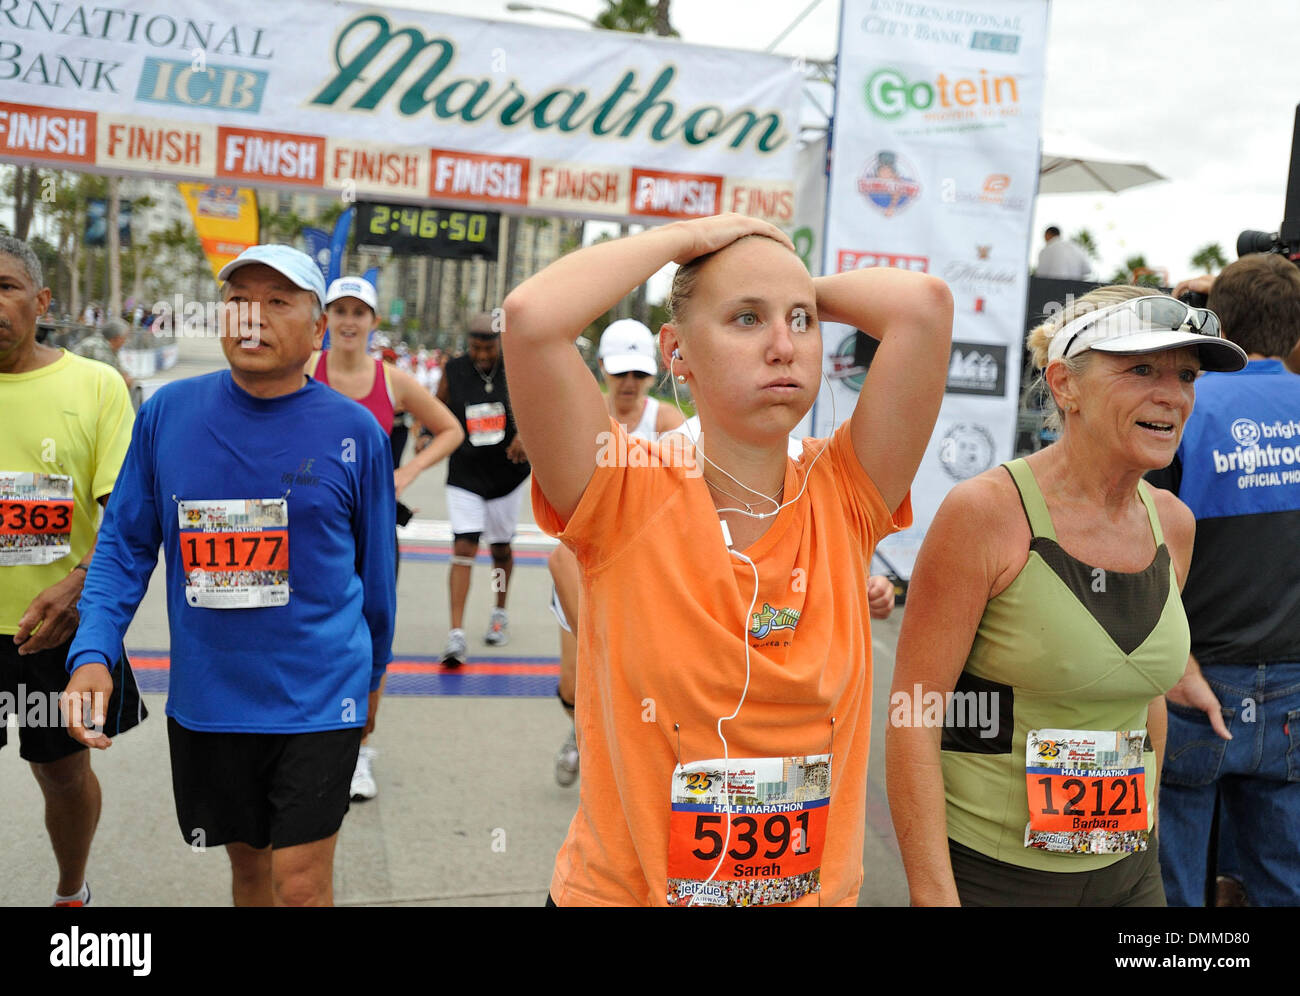 Oct 11, 2009 - Long Beach, California, USA - SARAH BADER (5391) finishes the half-marathon with a time of 2:32:35 during the 25th. Long Beach International City Bank Marathon on Sunday, October 11, 2009. (Credit Image: © Jeff Gritchen/ZUMA Press) Stock Photo